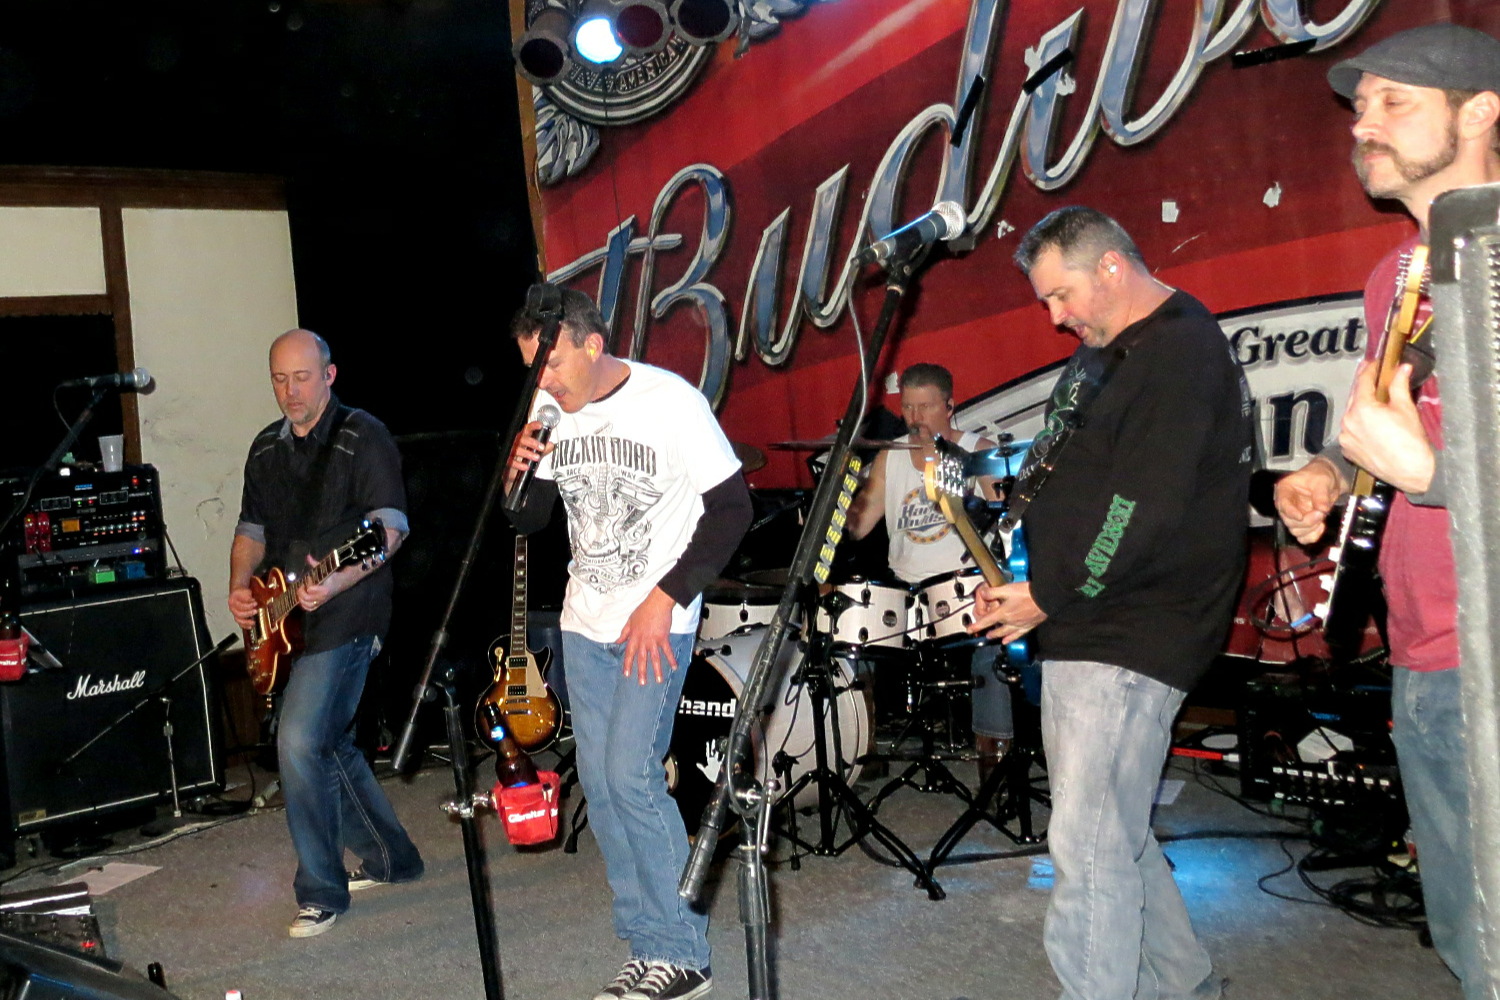 Live Music at The Roadhouse Lounge in West Point, Nebraska - 
						Nebraska Band Mr. Hand   
						performing live at  
						The Roadhouse Lounge in West Point, Nebraska 
						on Saturday, December 19, 2015. 
						The Roadhouse Lounge is located at 
						1204 S Lincoln Street, 
						West Point, NE 68788, 
						Phone: (402) 372-5857.